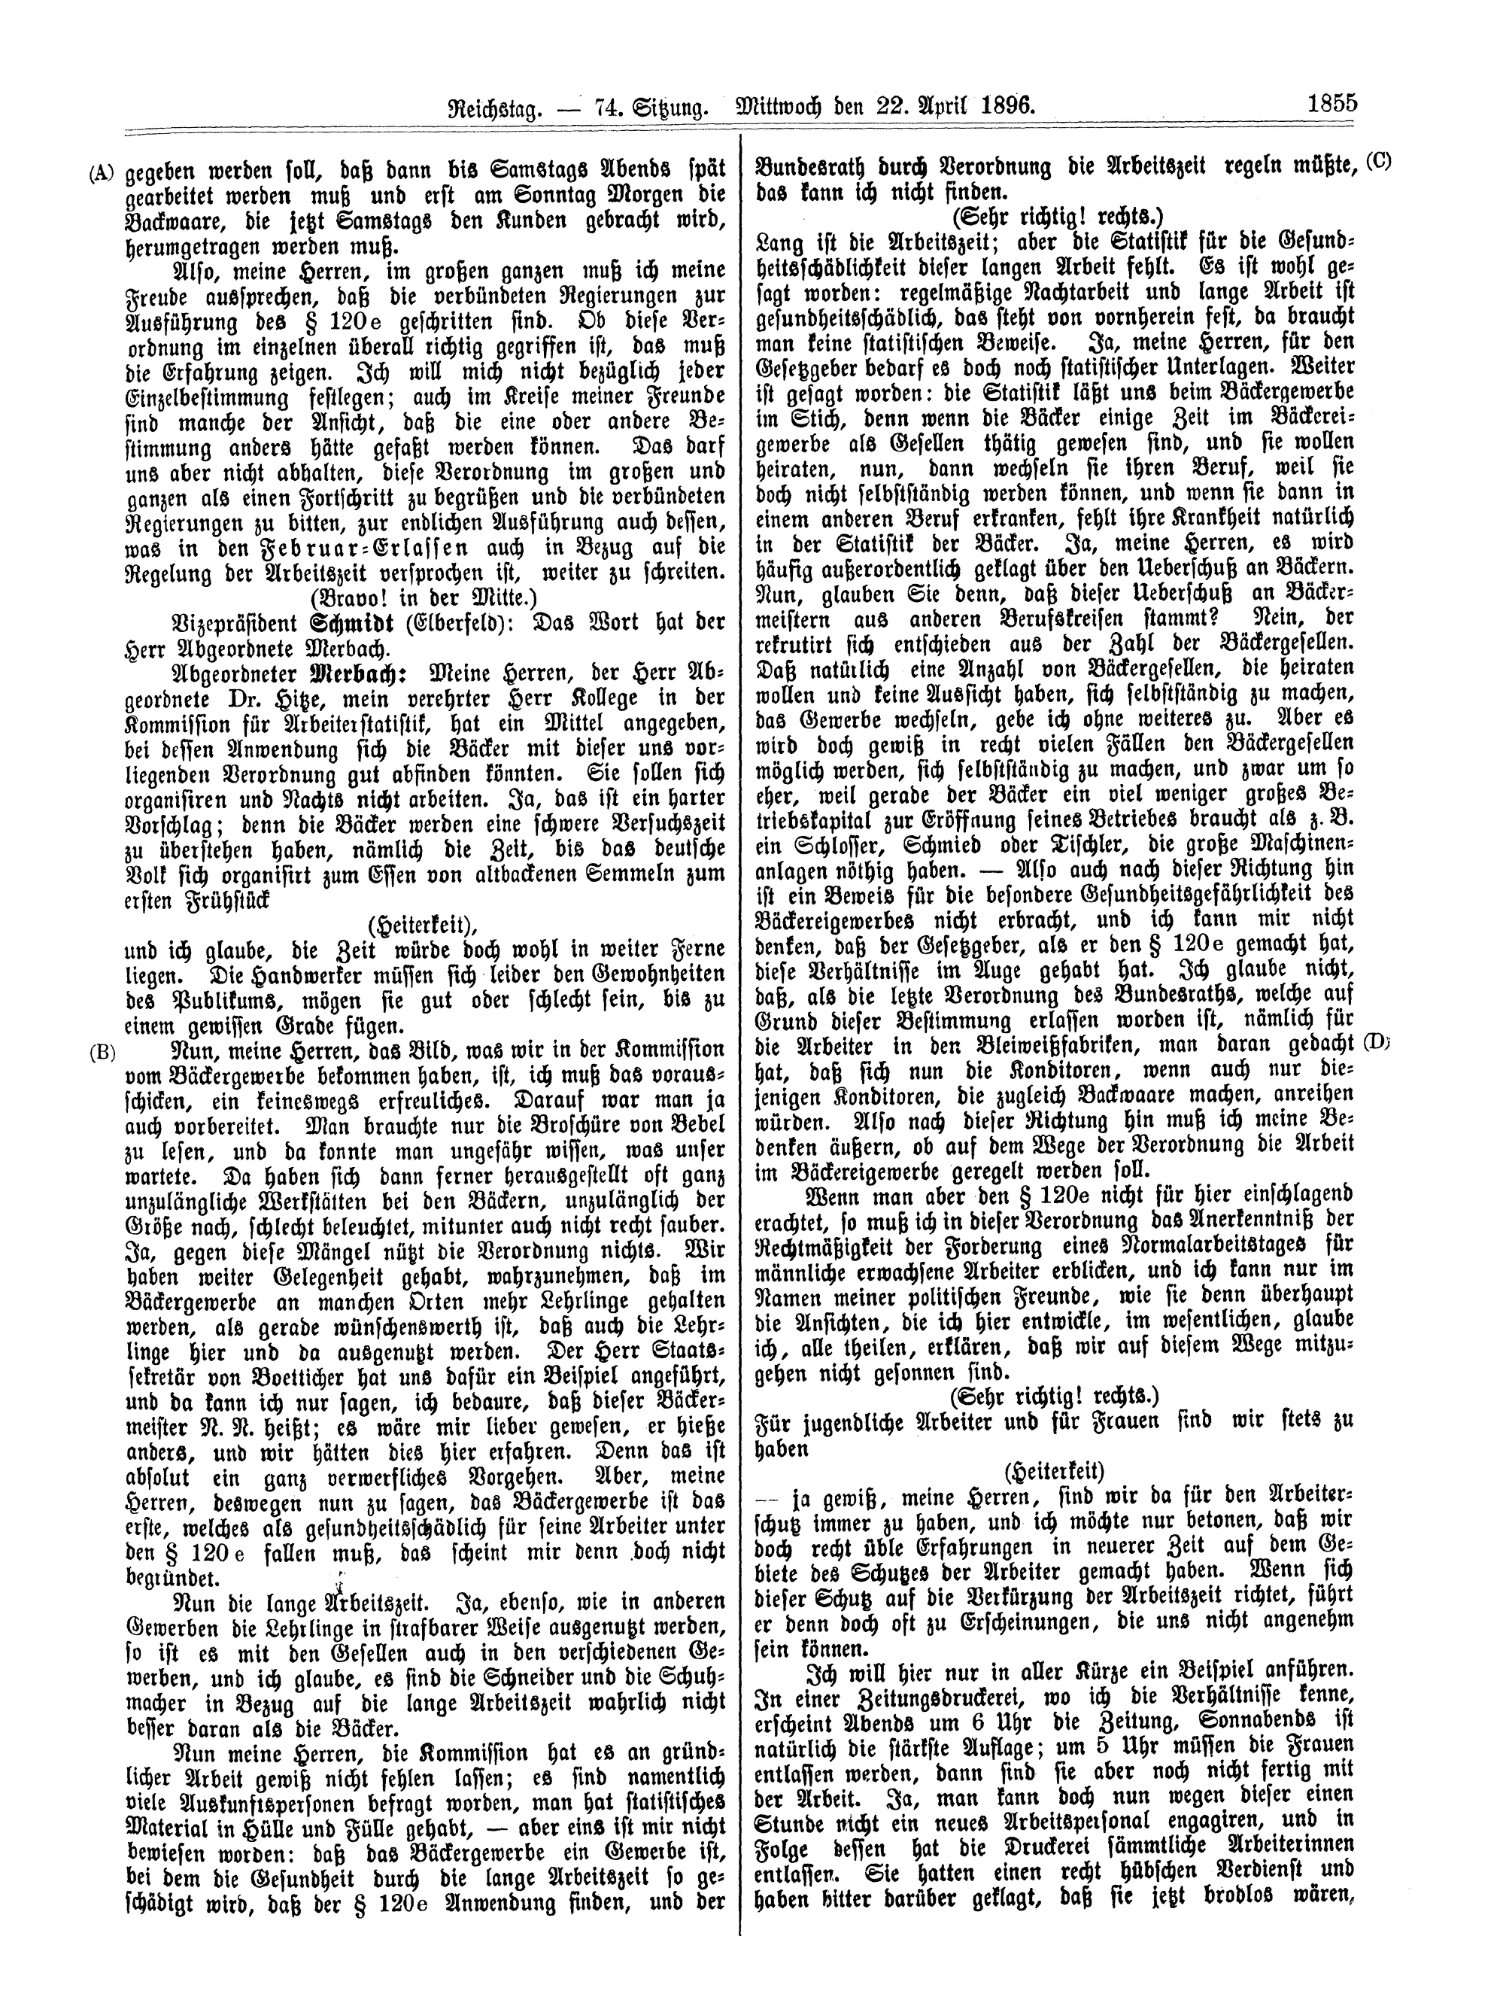 Scan of page 1855